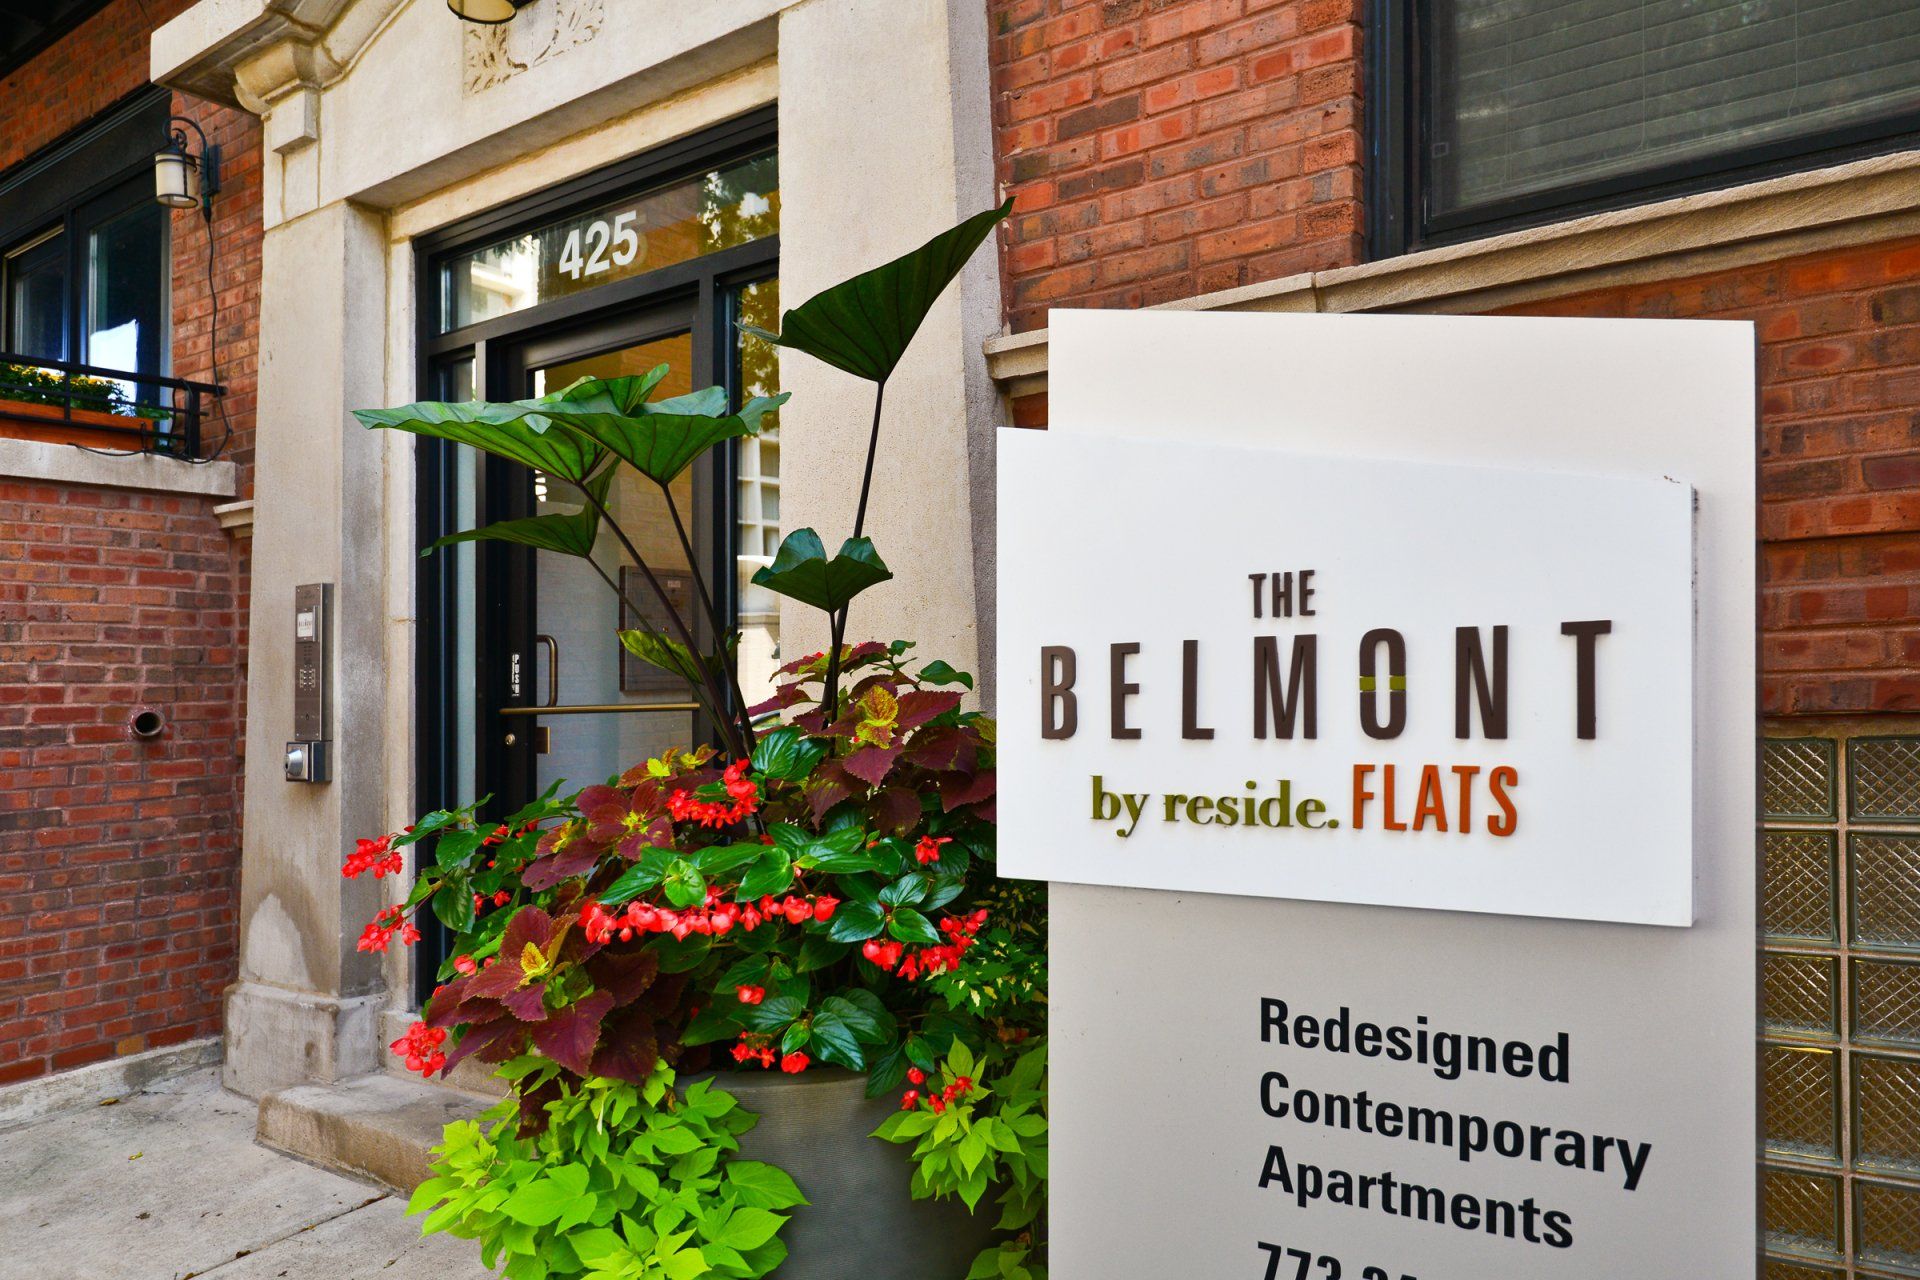 Apartment signage outside of the apartment building that says The Belmont by Reside Flats.